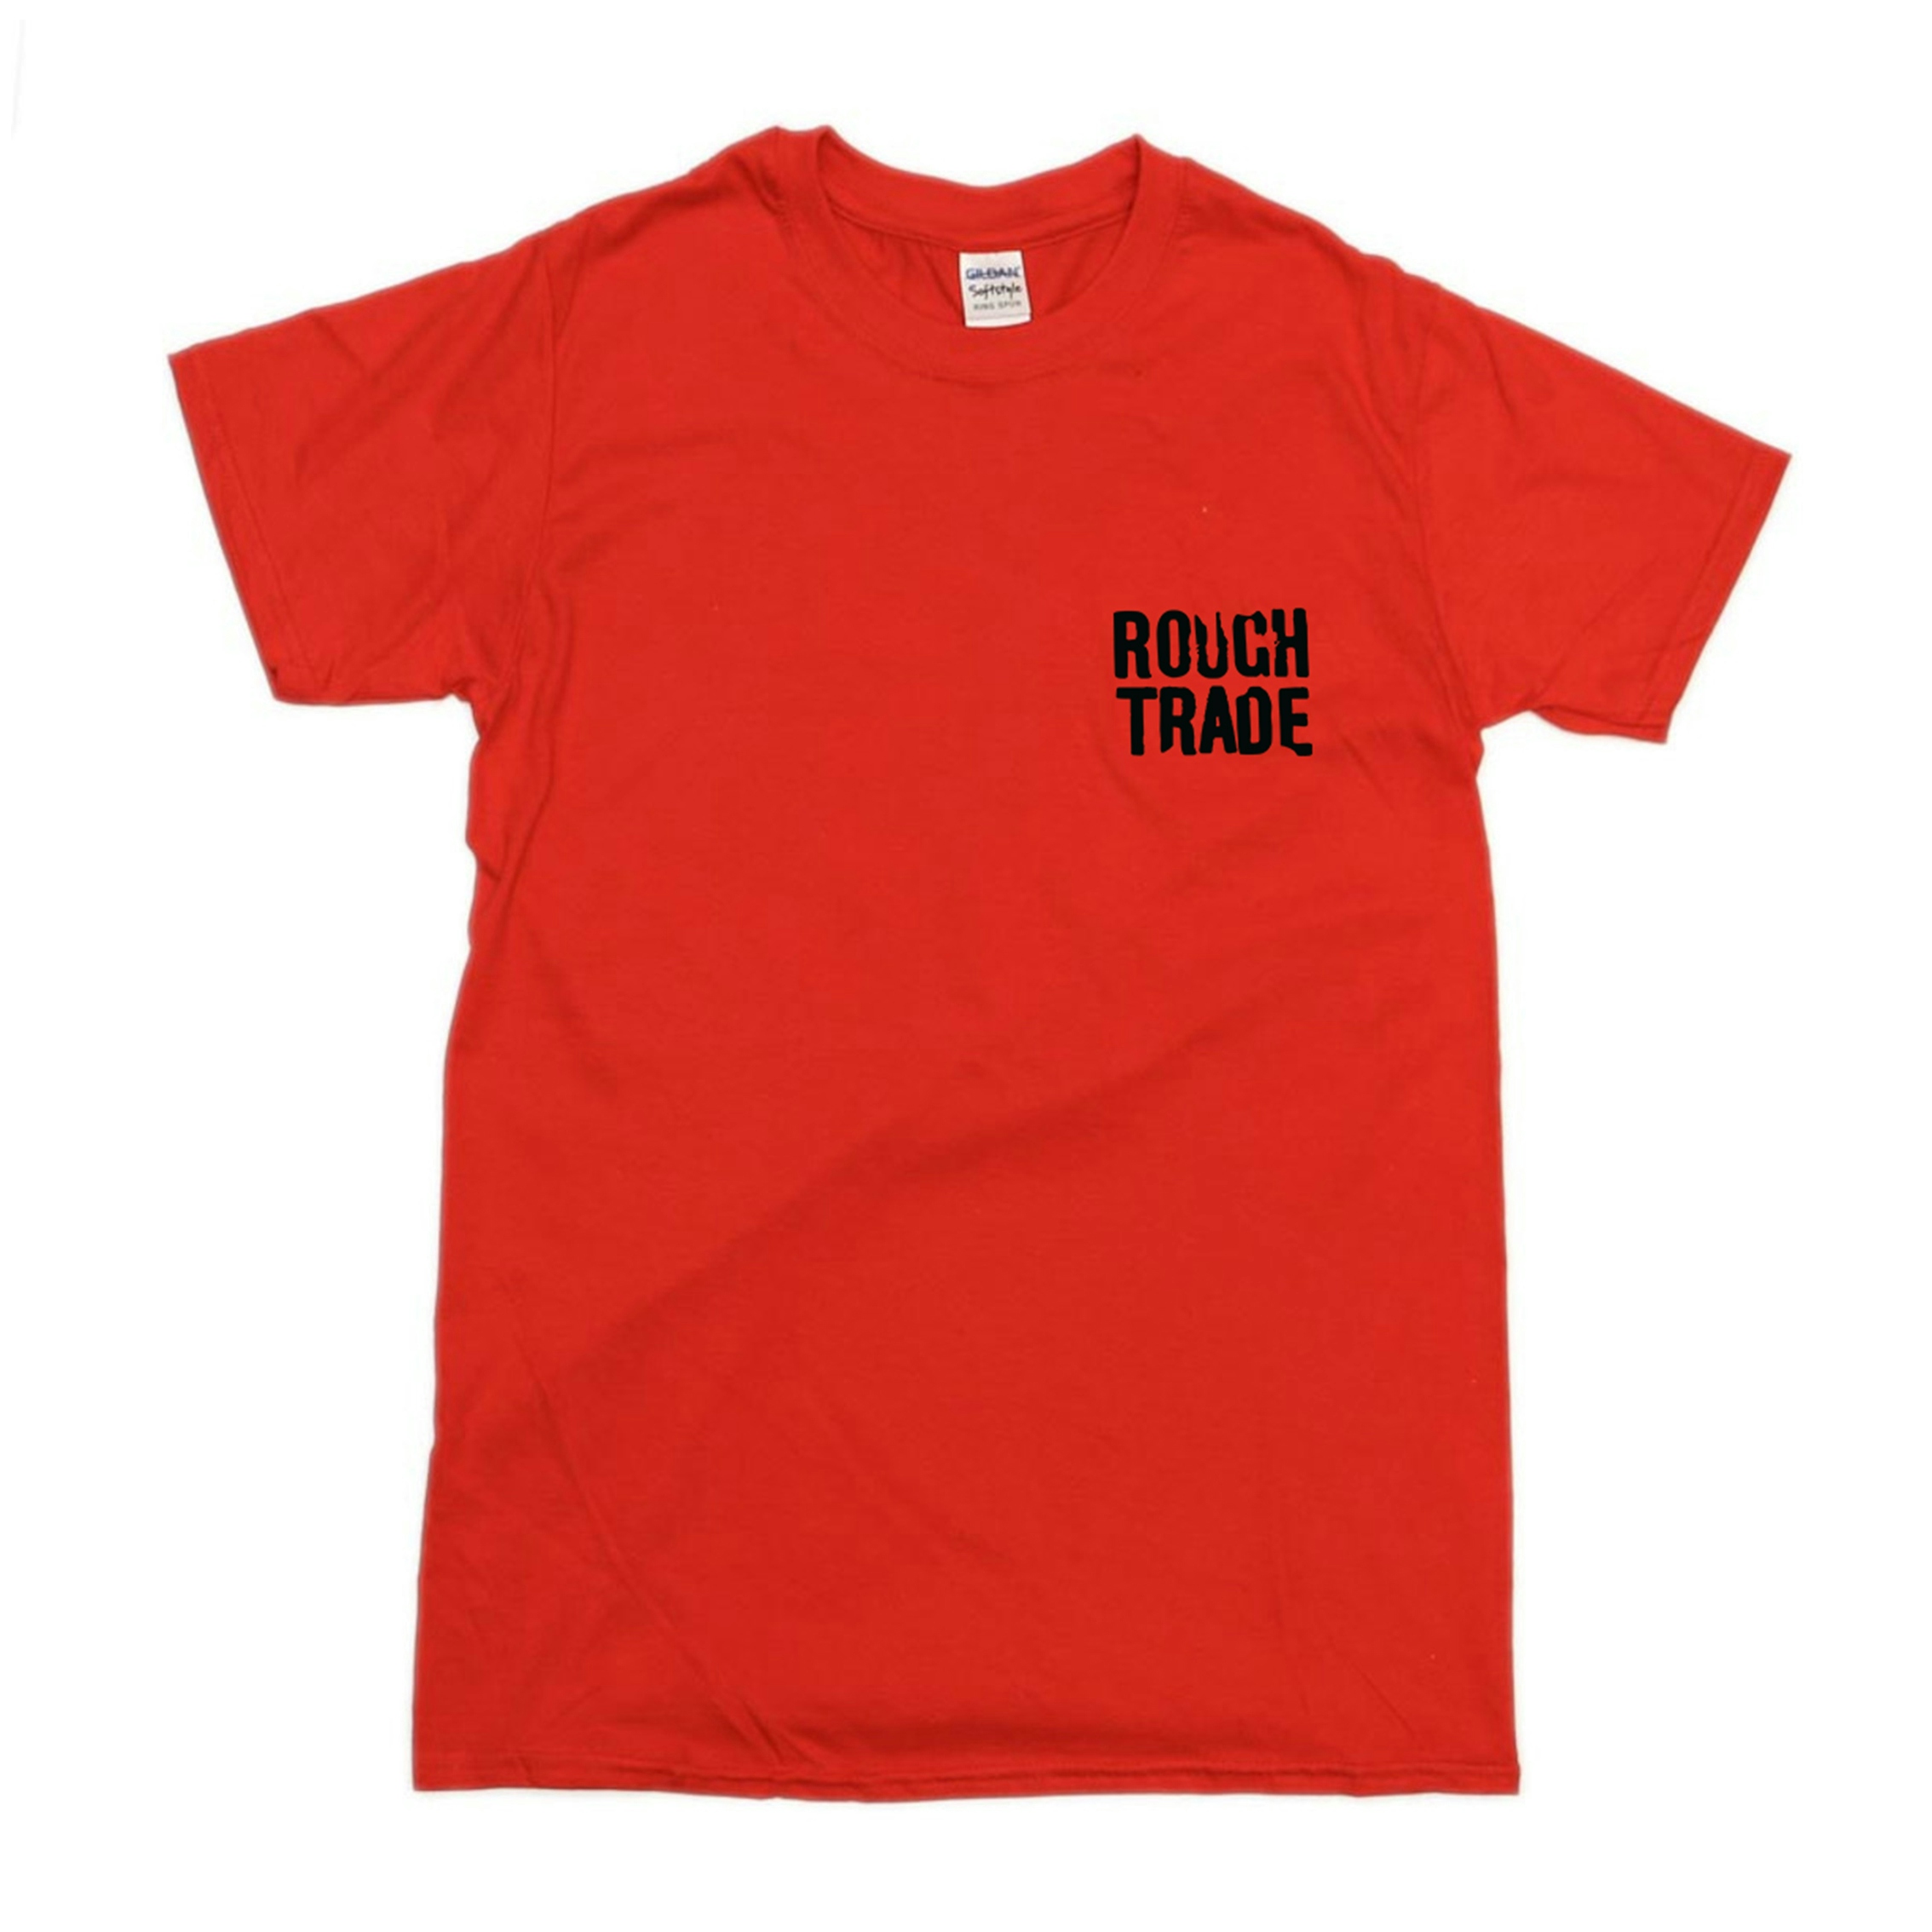 Album artwork for Limited Red Rough Trade Tee by Rough Trade